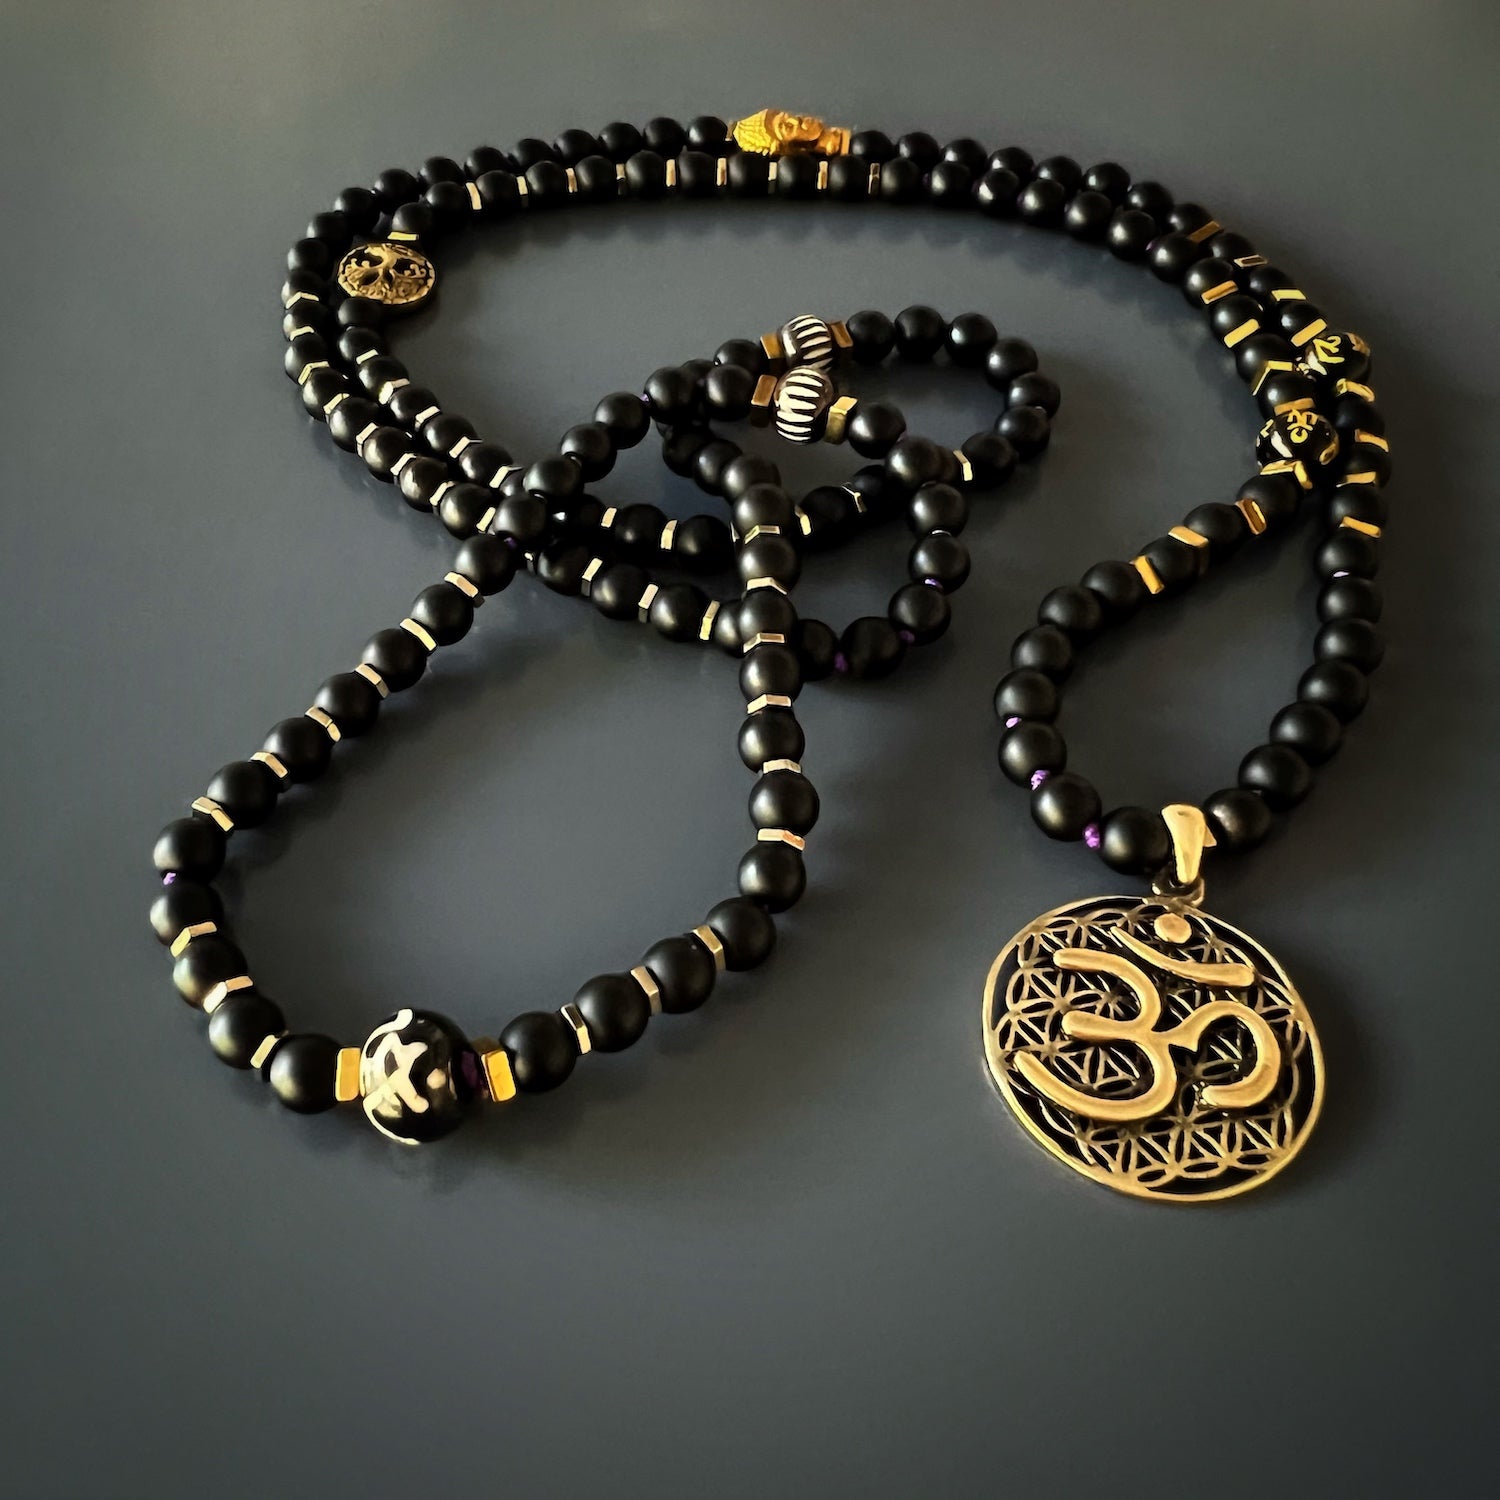 The intricate bronze Om pendant at the center of the Spiritual Yoga Mala Onyx Necklace